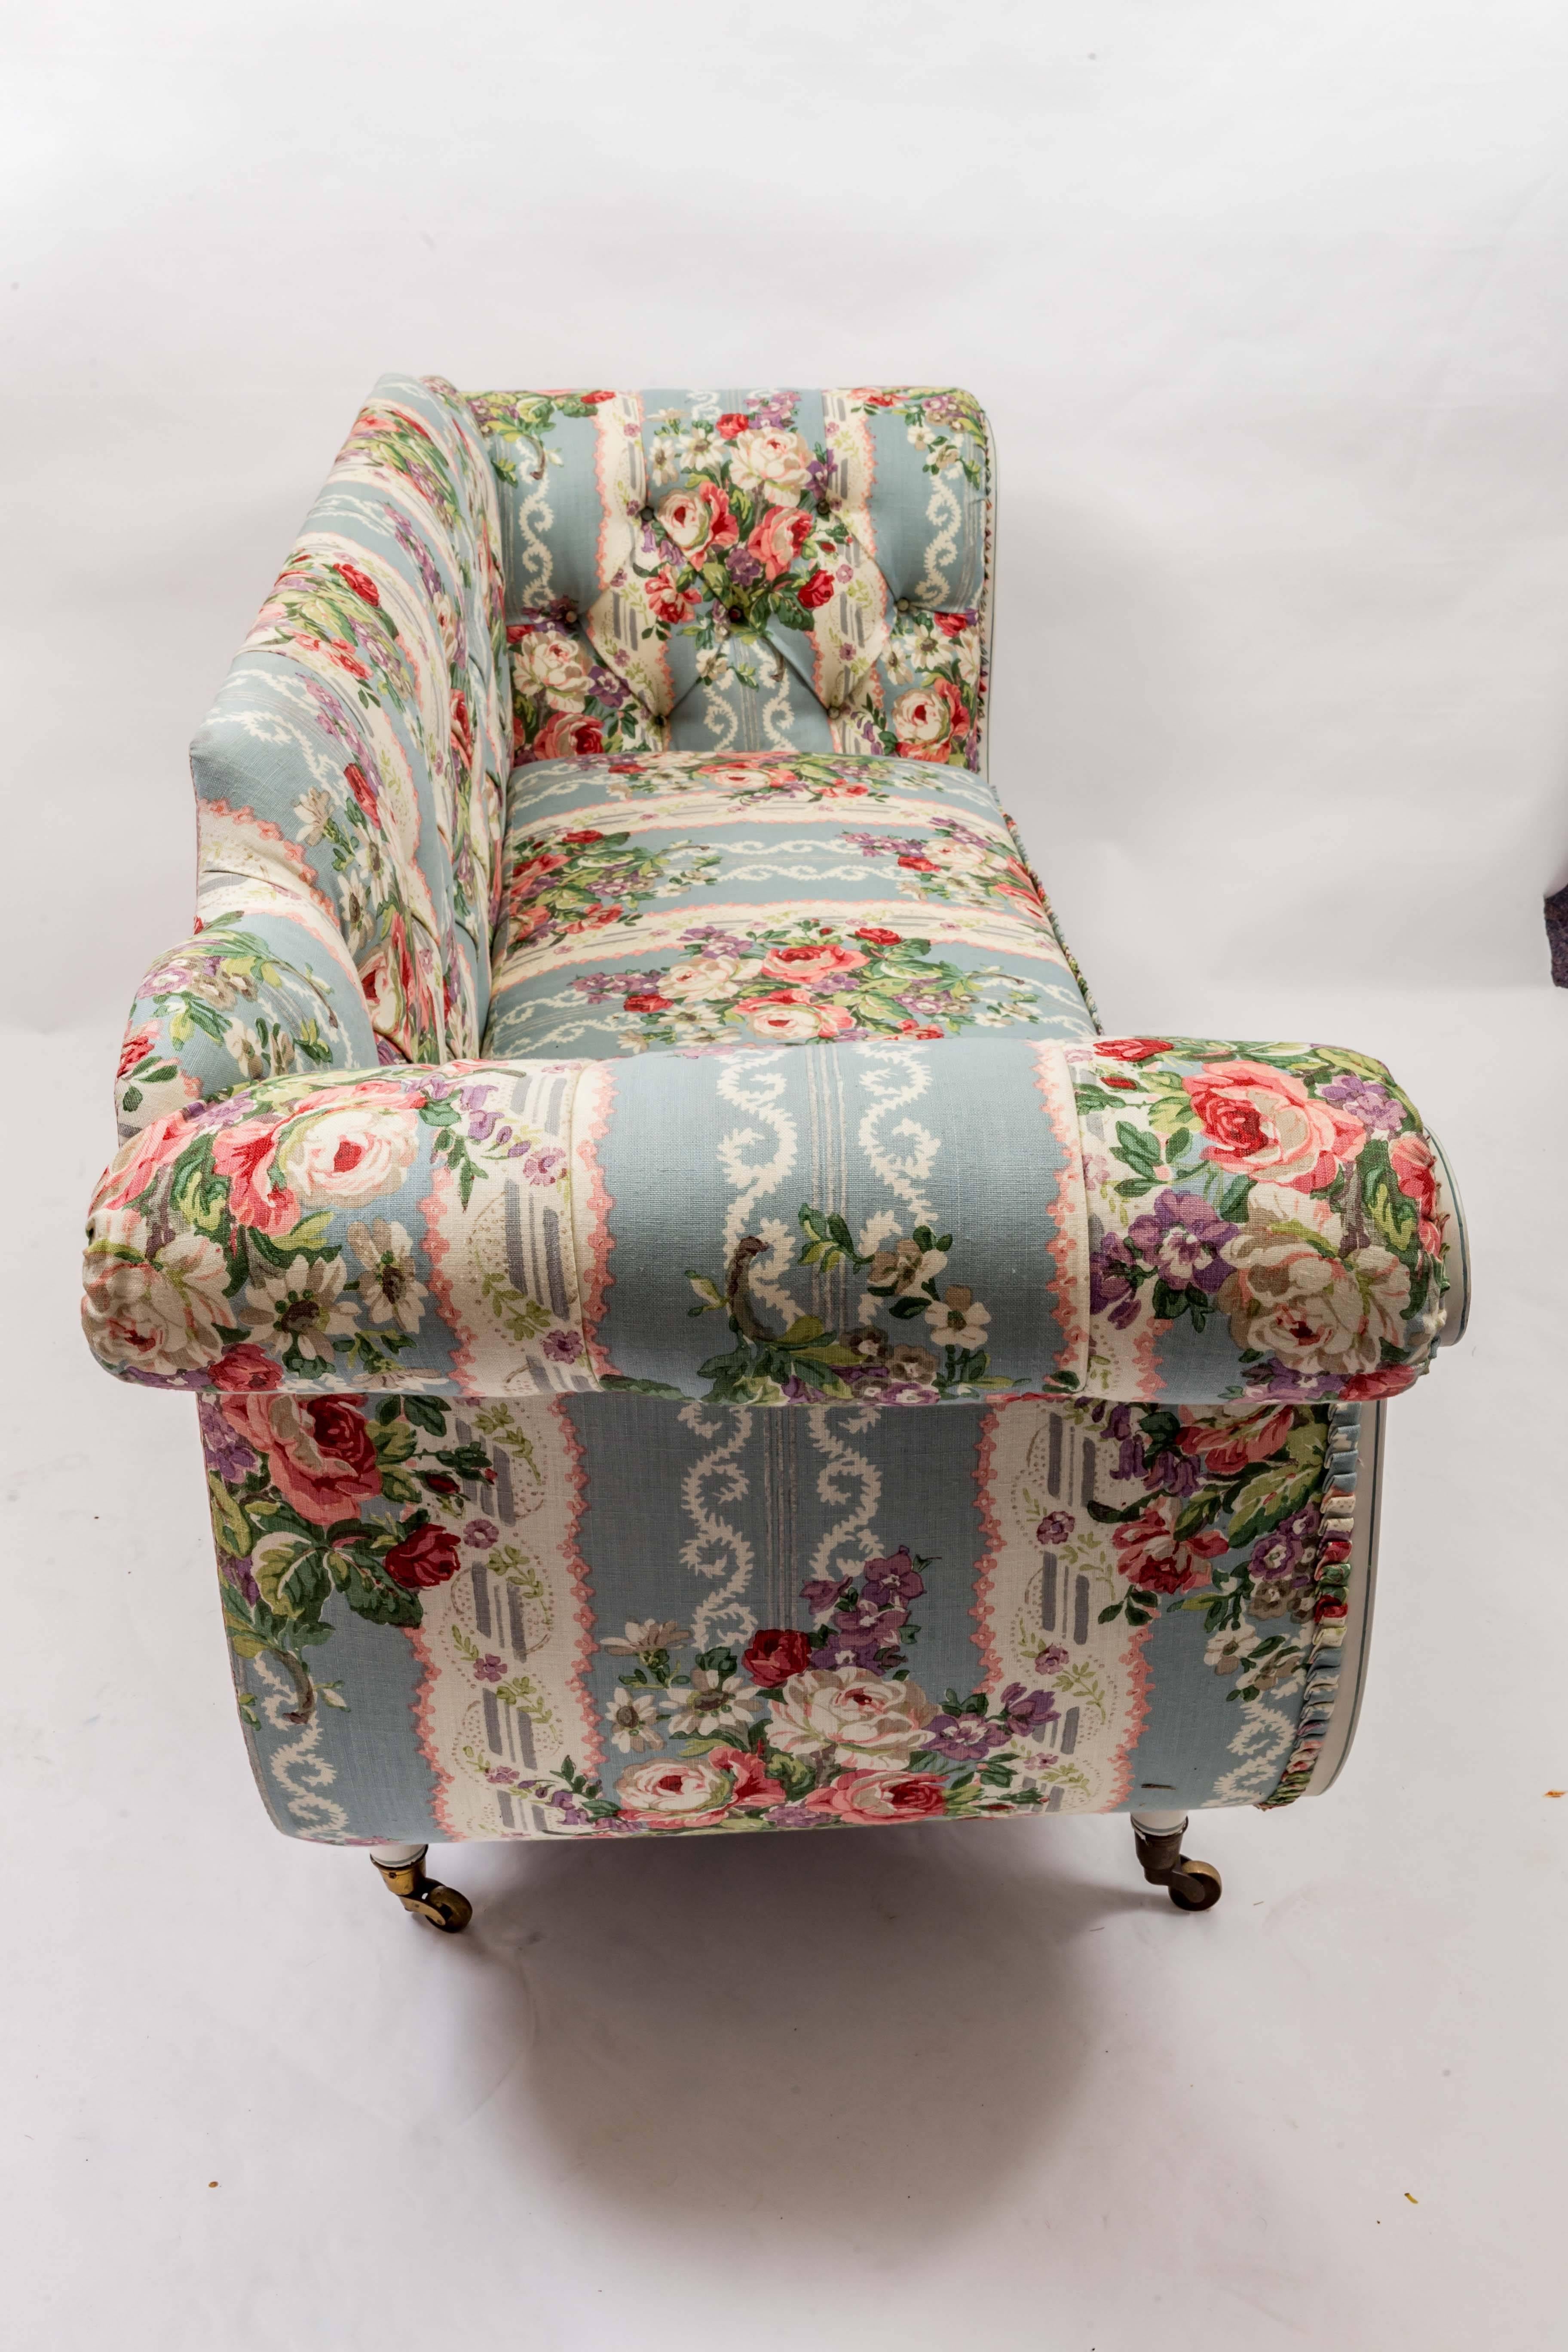 19th Century English Regency Settee in Floral Linen Print Fabric 1